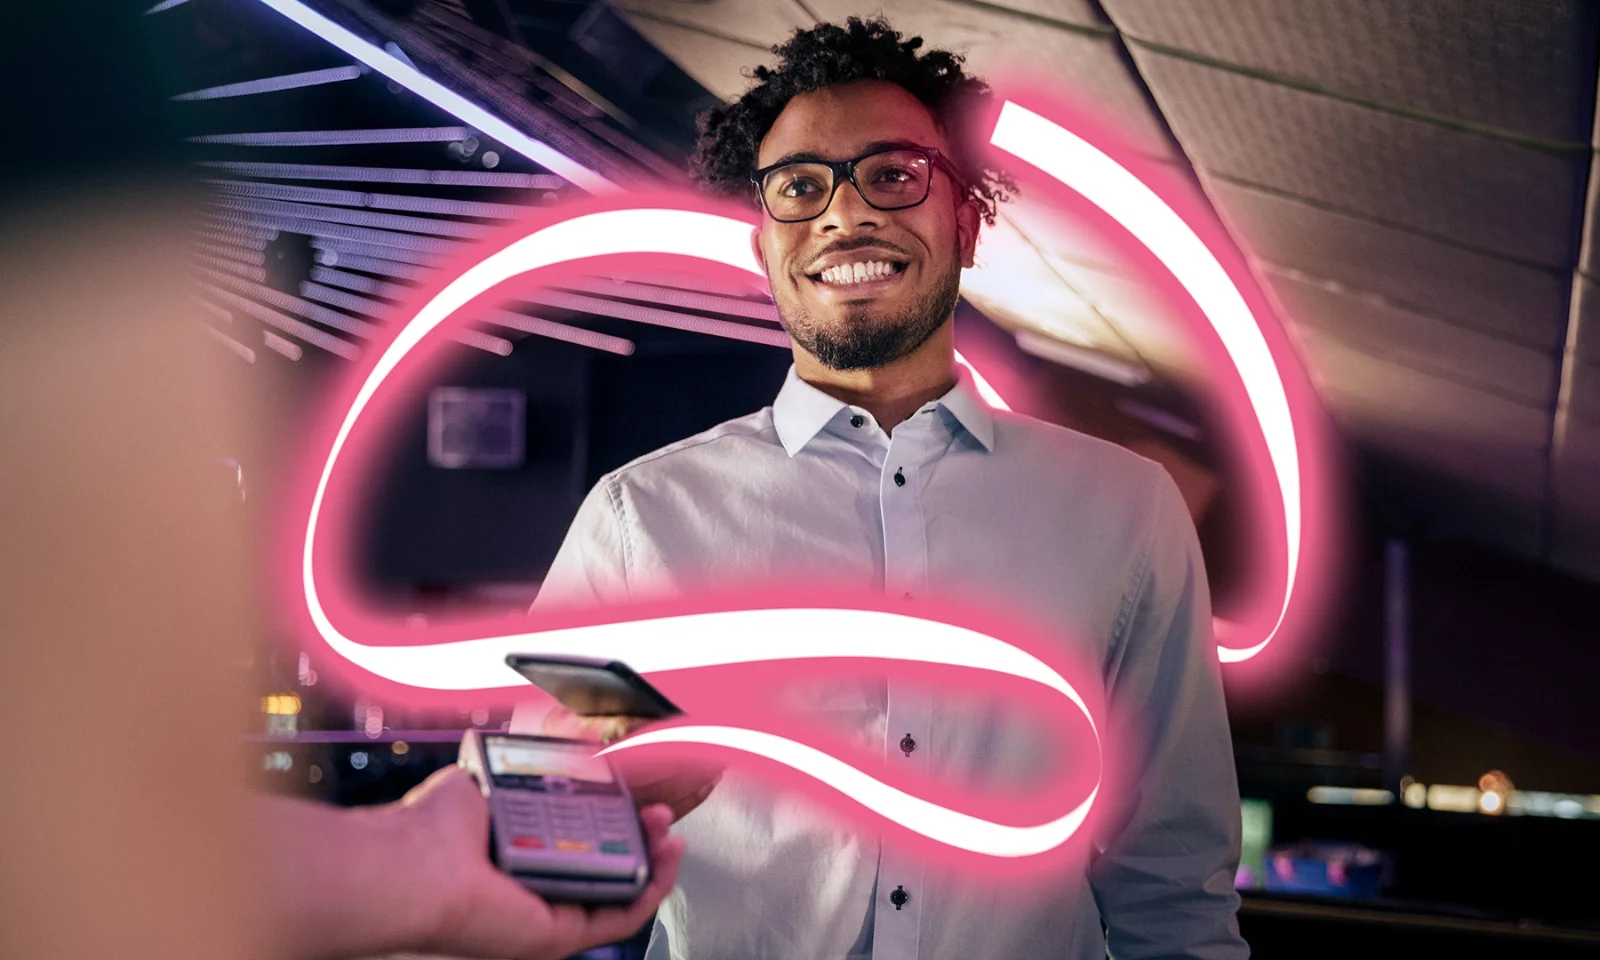 The image features a smiling man in a white shirt and glasses, standing in a modern indoor setting, making a contactless payment with a smartphone. A glowing pink light swirls around him, creating a dynamic and futuristic visual effect. The background is dark, with subtle lighting and reflections, emphasizing the man and the glowing light. This visual symbolizes modern, seamless, and innovative financial transactions, reflecting themes of advanced technology and convenience in core banking solutions.